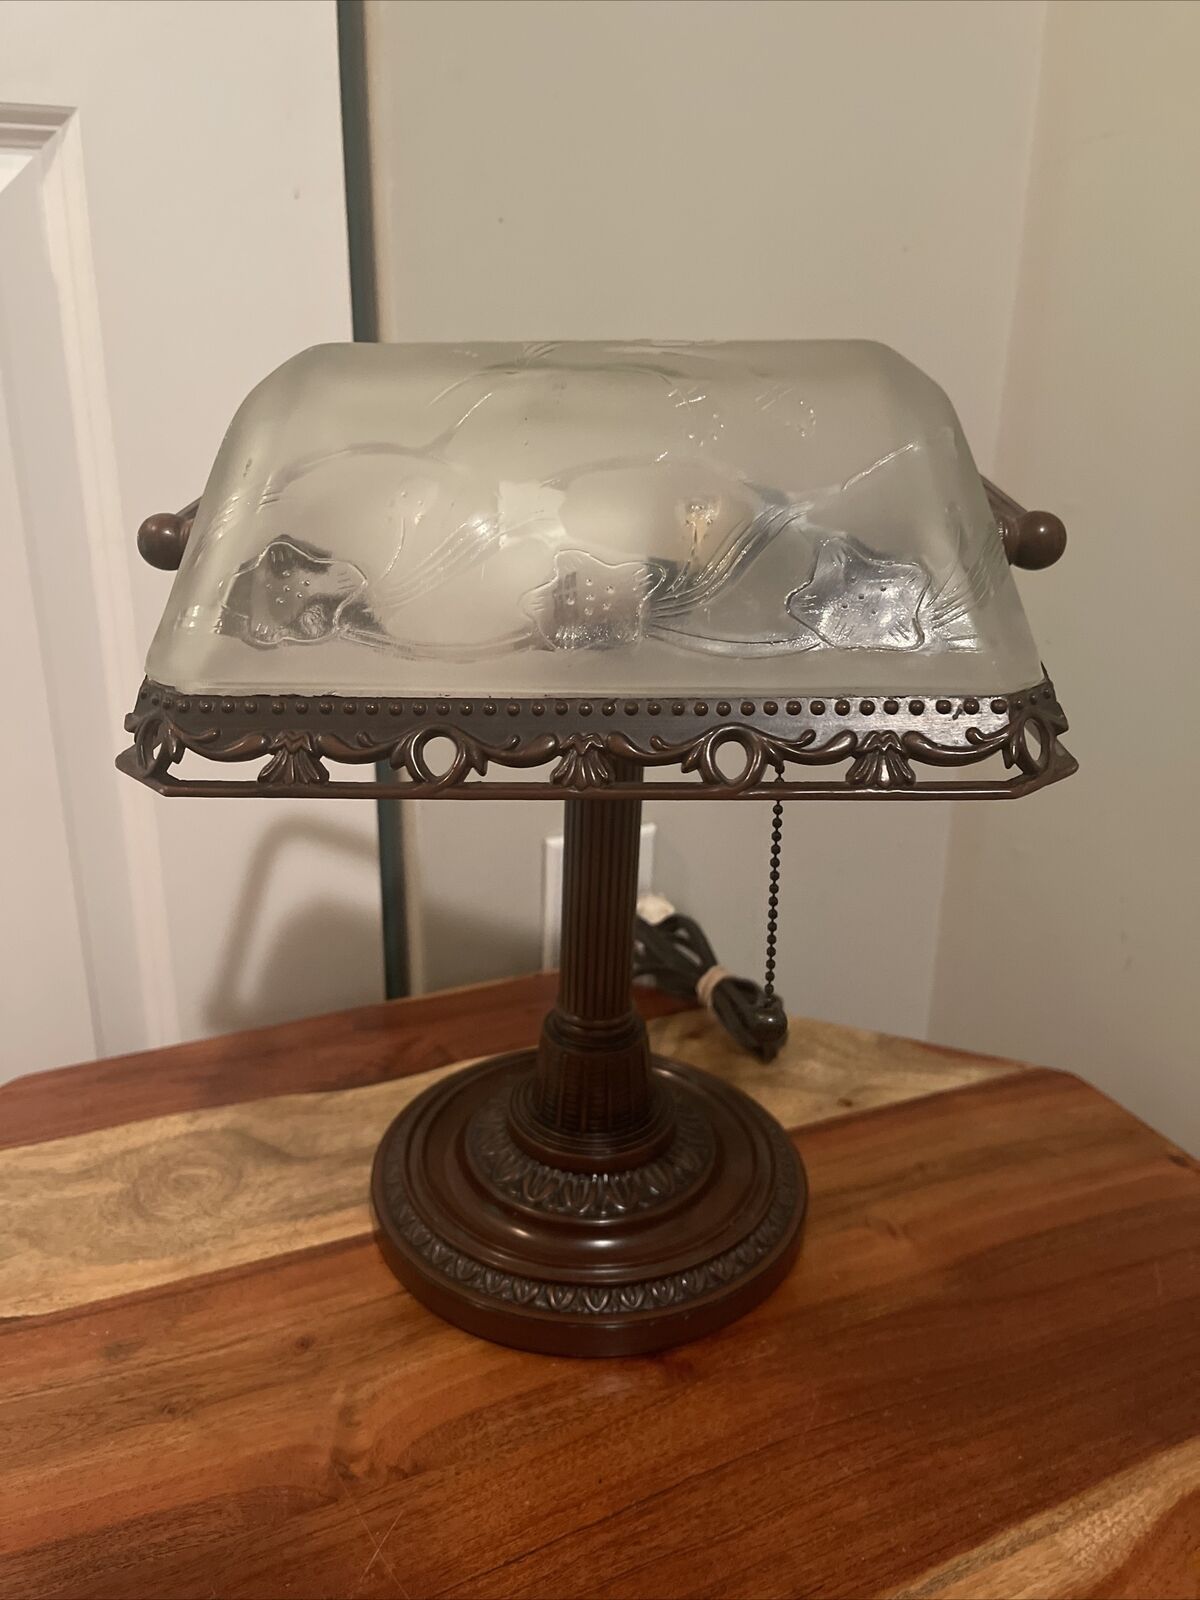 Vintage Bronze Bankers Lamp Frost Etched Glass Antique Style Desk Lamp.